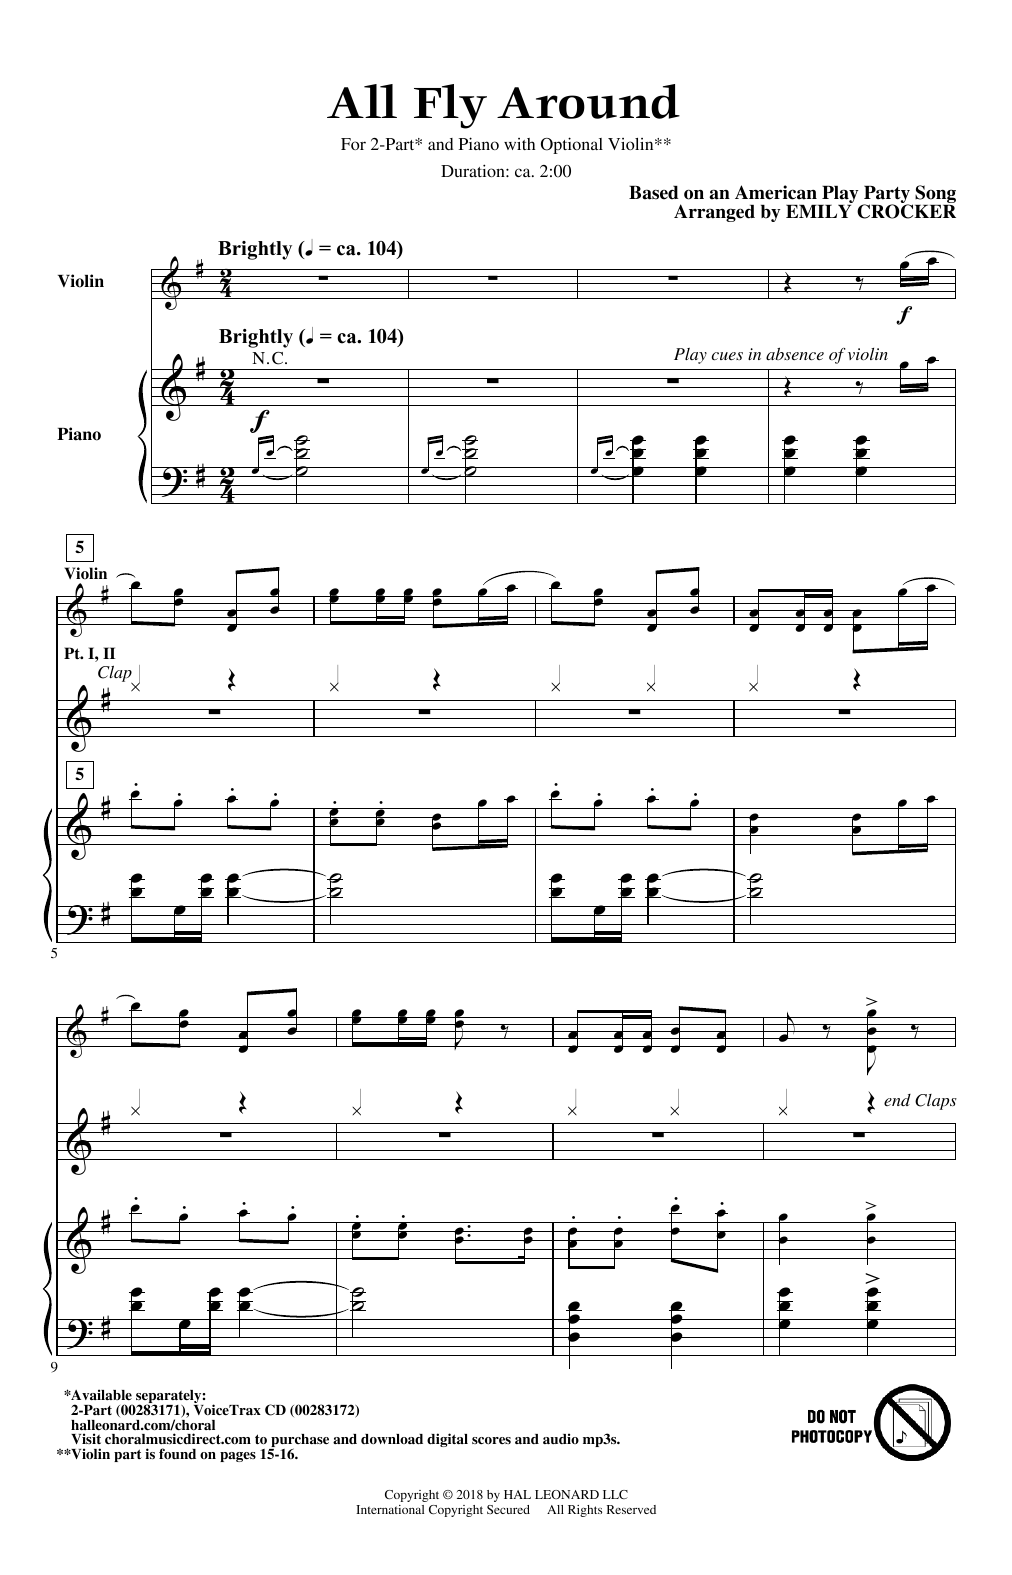 Download Emily Crocker All Fly Around Sheet Music